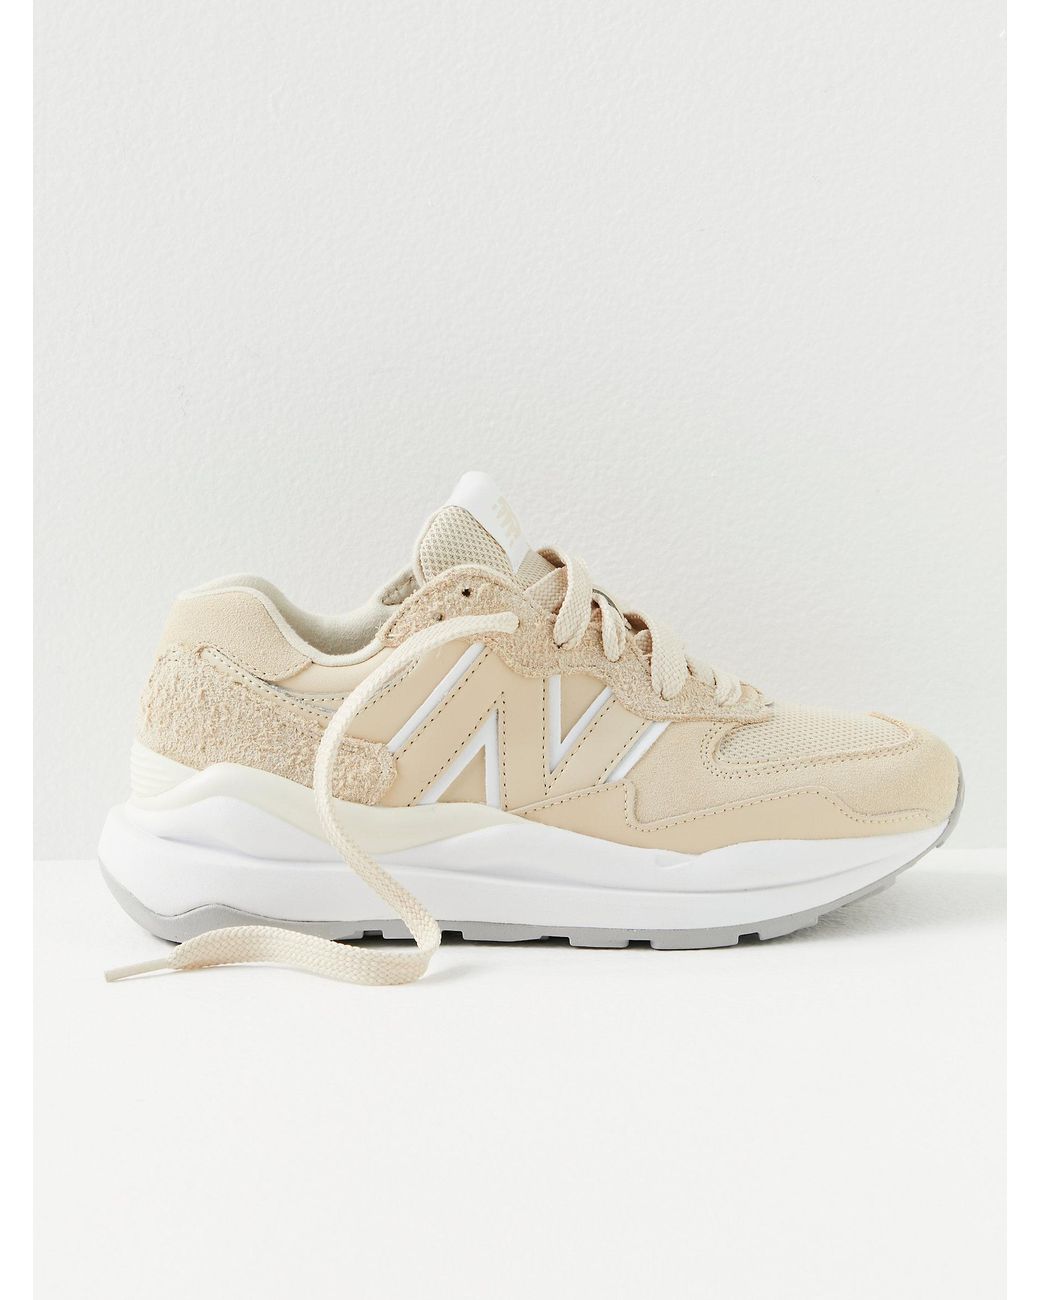 Free People New Balance 57/40 Sneakers in Natural | Lyst